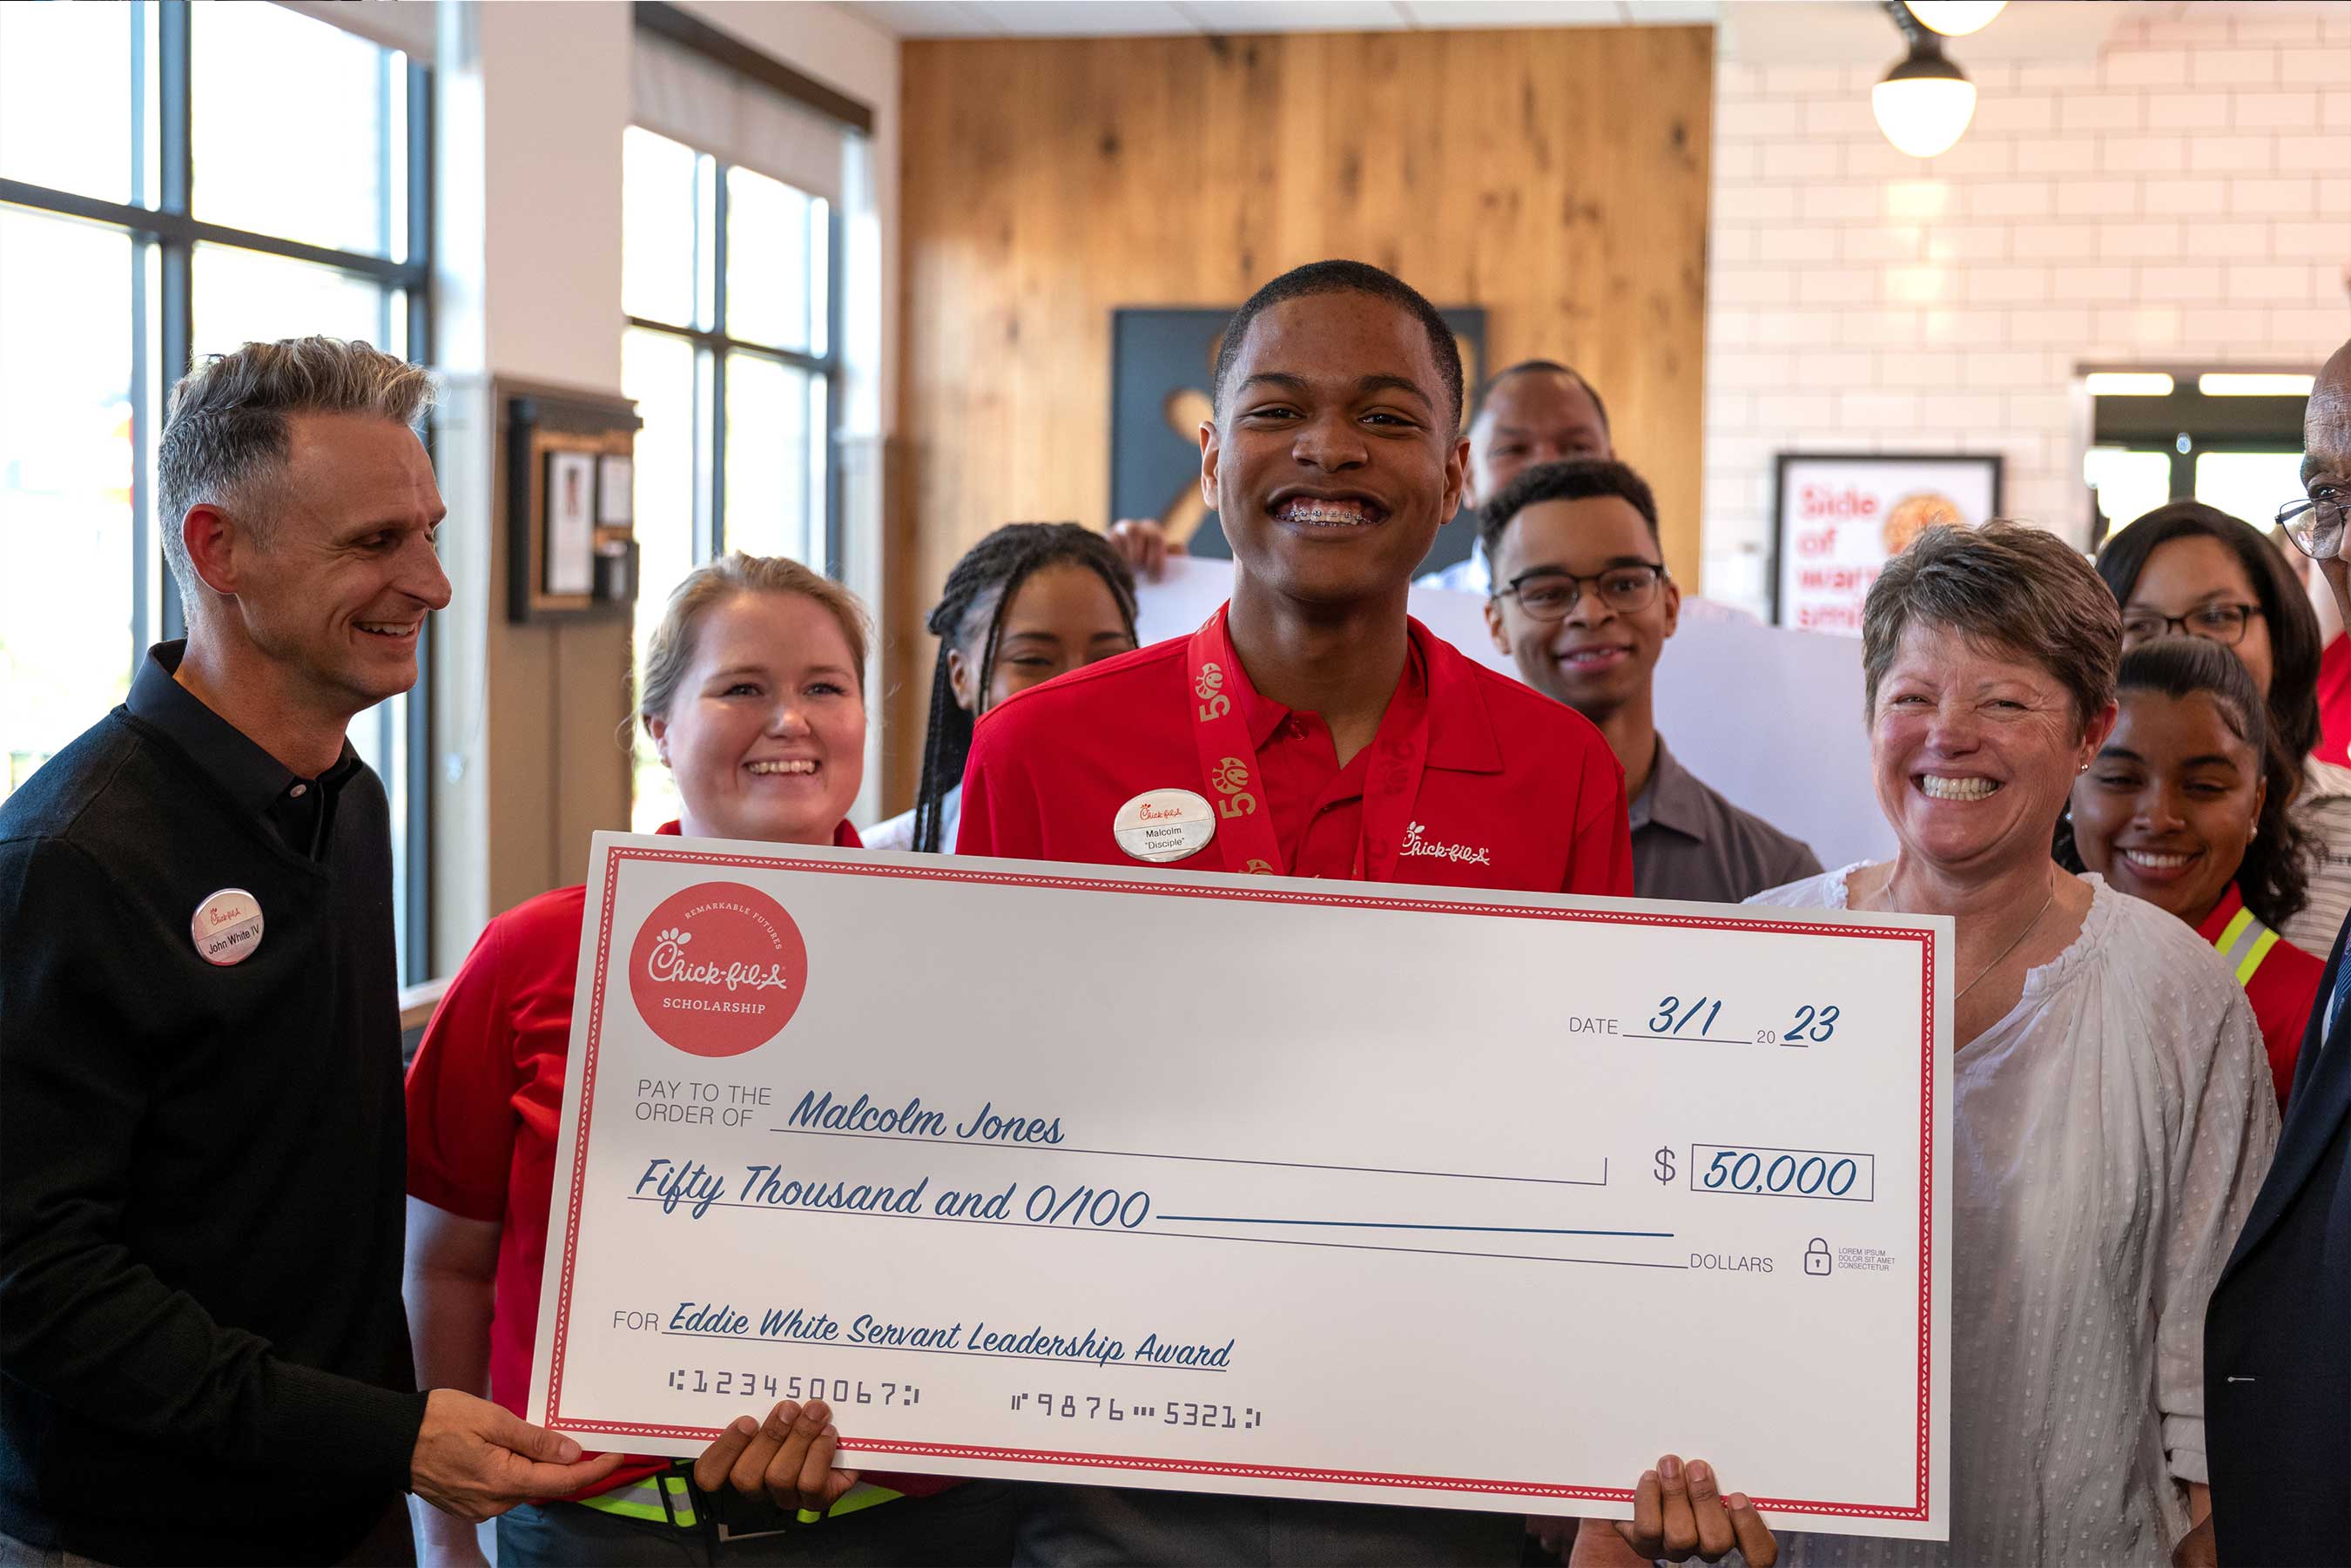 Chick-fil-A restaurant Team Member Malcolm Jones, of Wilson, N.C., was surprised with the one-time Eddie White Servant Leadership Award for $50,000 ─ the largest scholarship in Chick-fil-A history – in honor of 50 years of scholarship giving at Chick-fil-A.